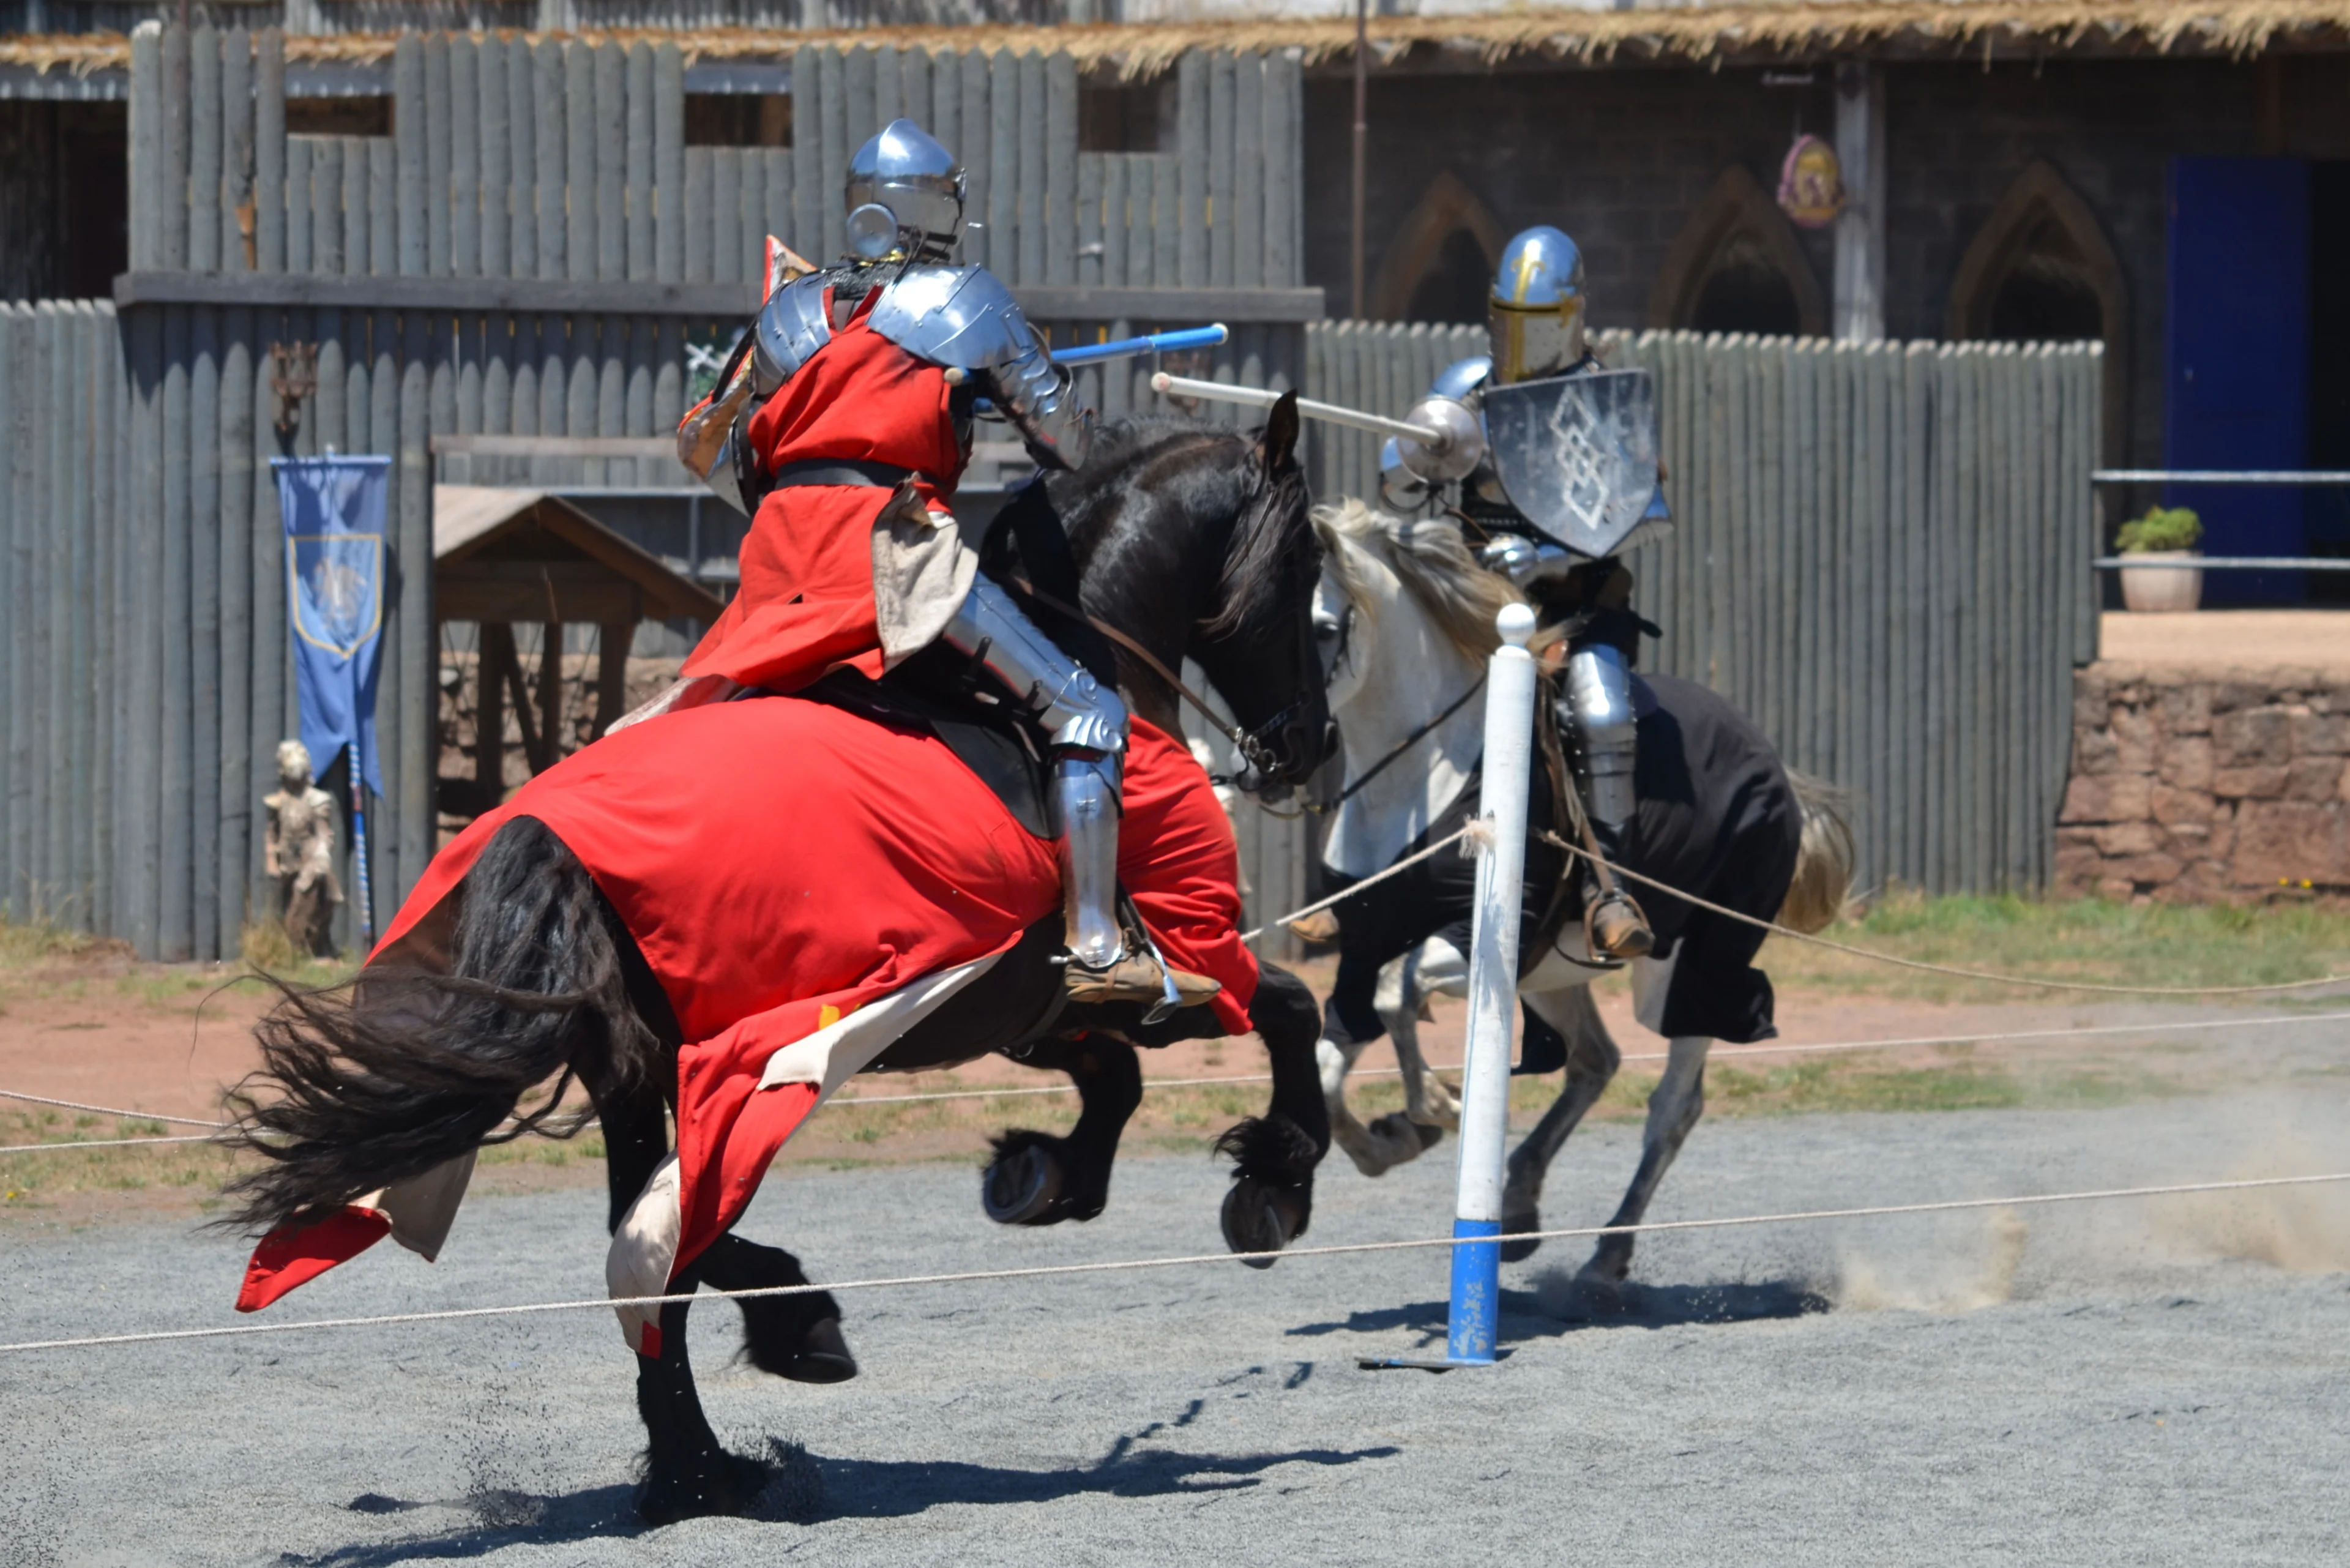 Two knights in armour jousting on black horses at Kyral Castle, Ballarat